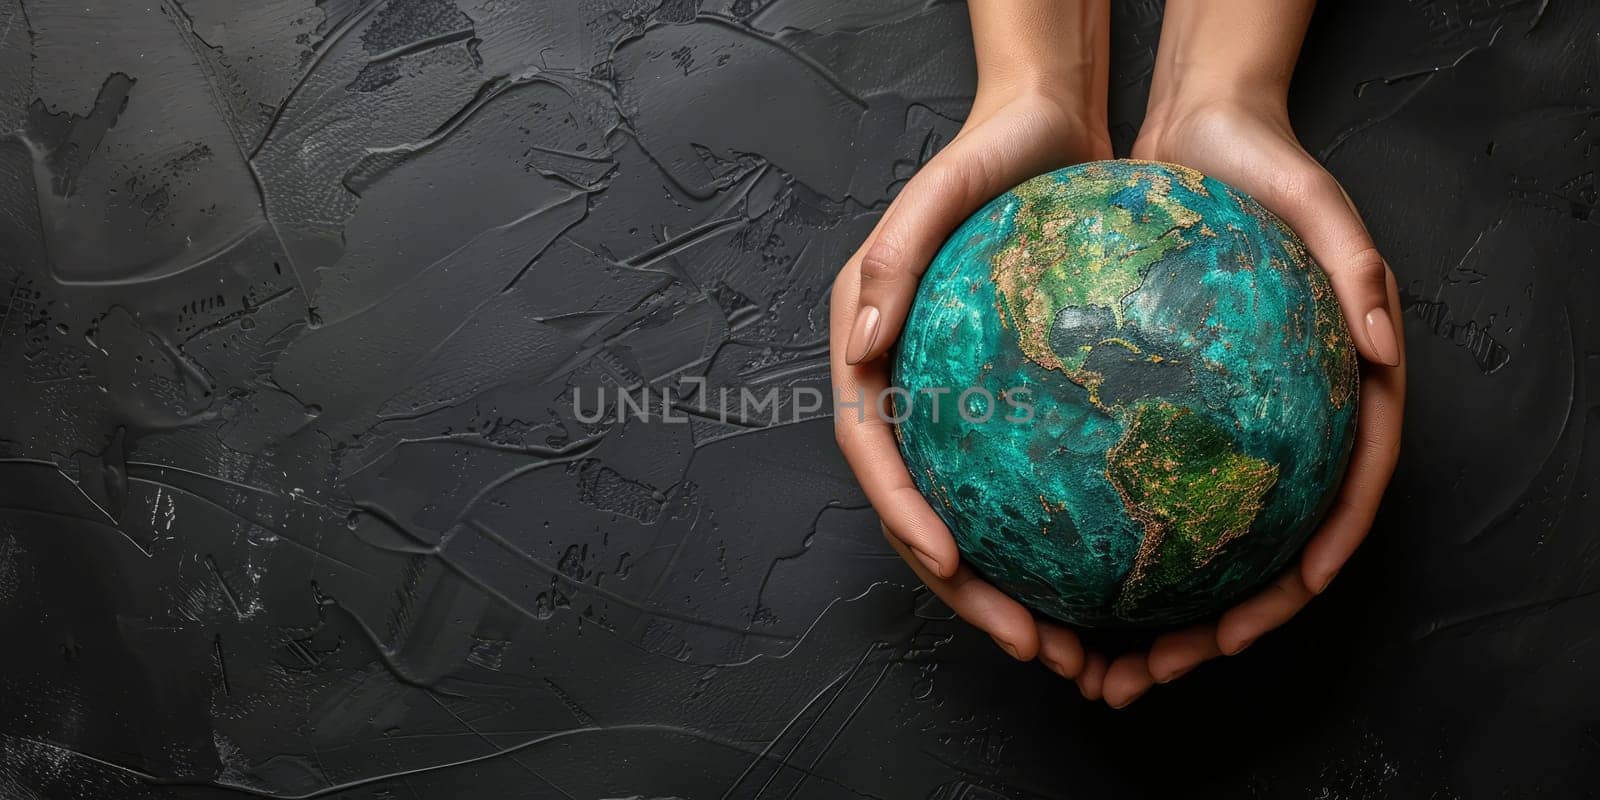 Hands holding fragile planet Earth, environmental conservation concept. World map on globe surrounded by chalk drawings representing environmental crisis.